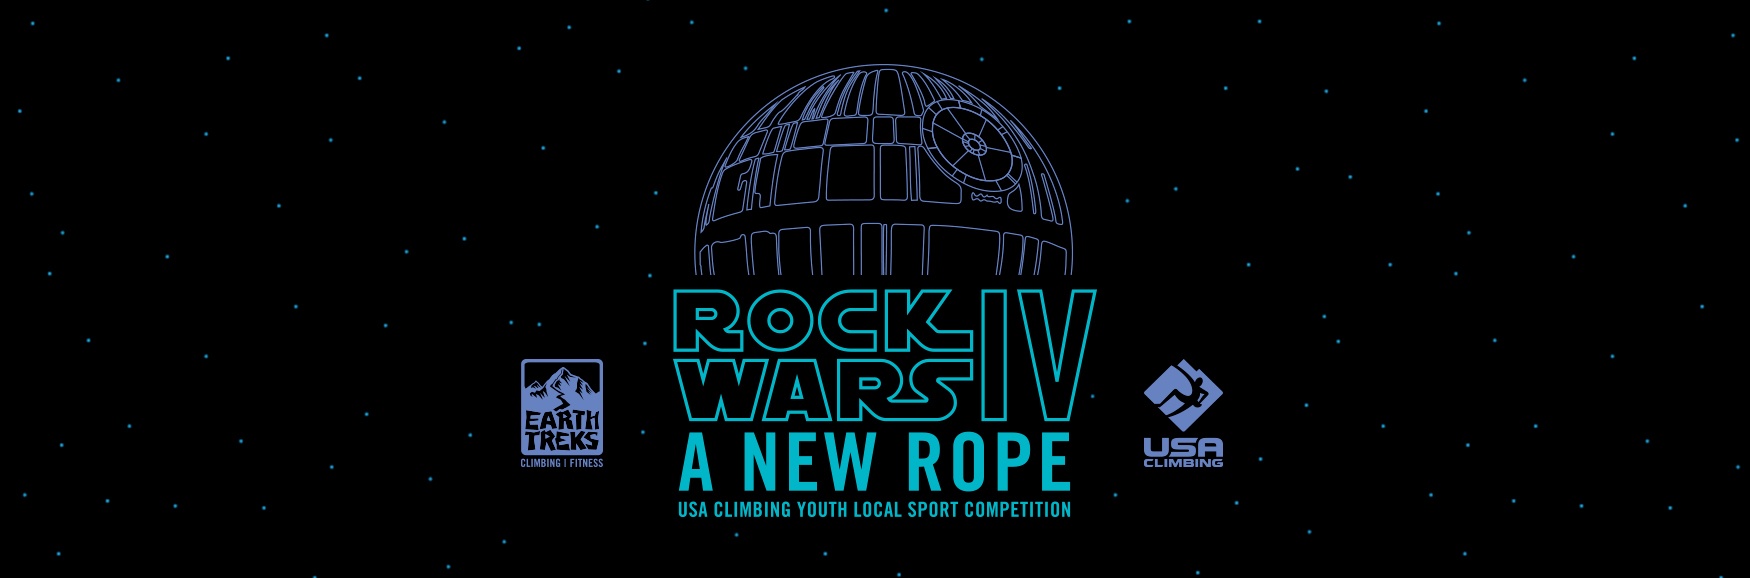 ROCK WARS IV: A NEW ROPE! USA CLIMBING COMPETITION